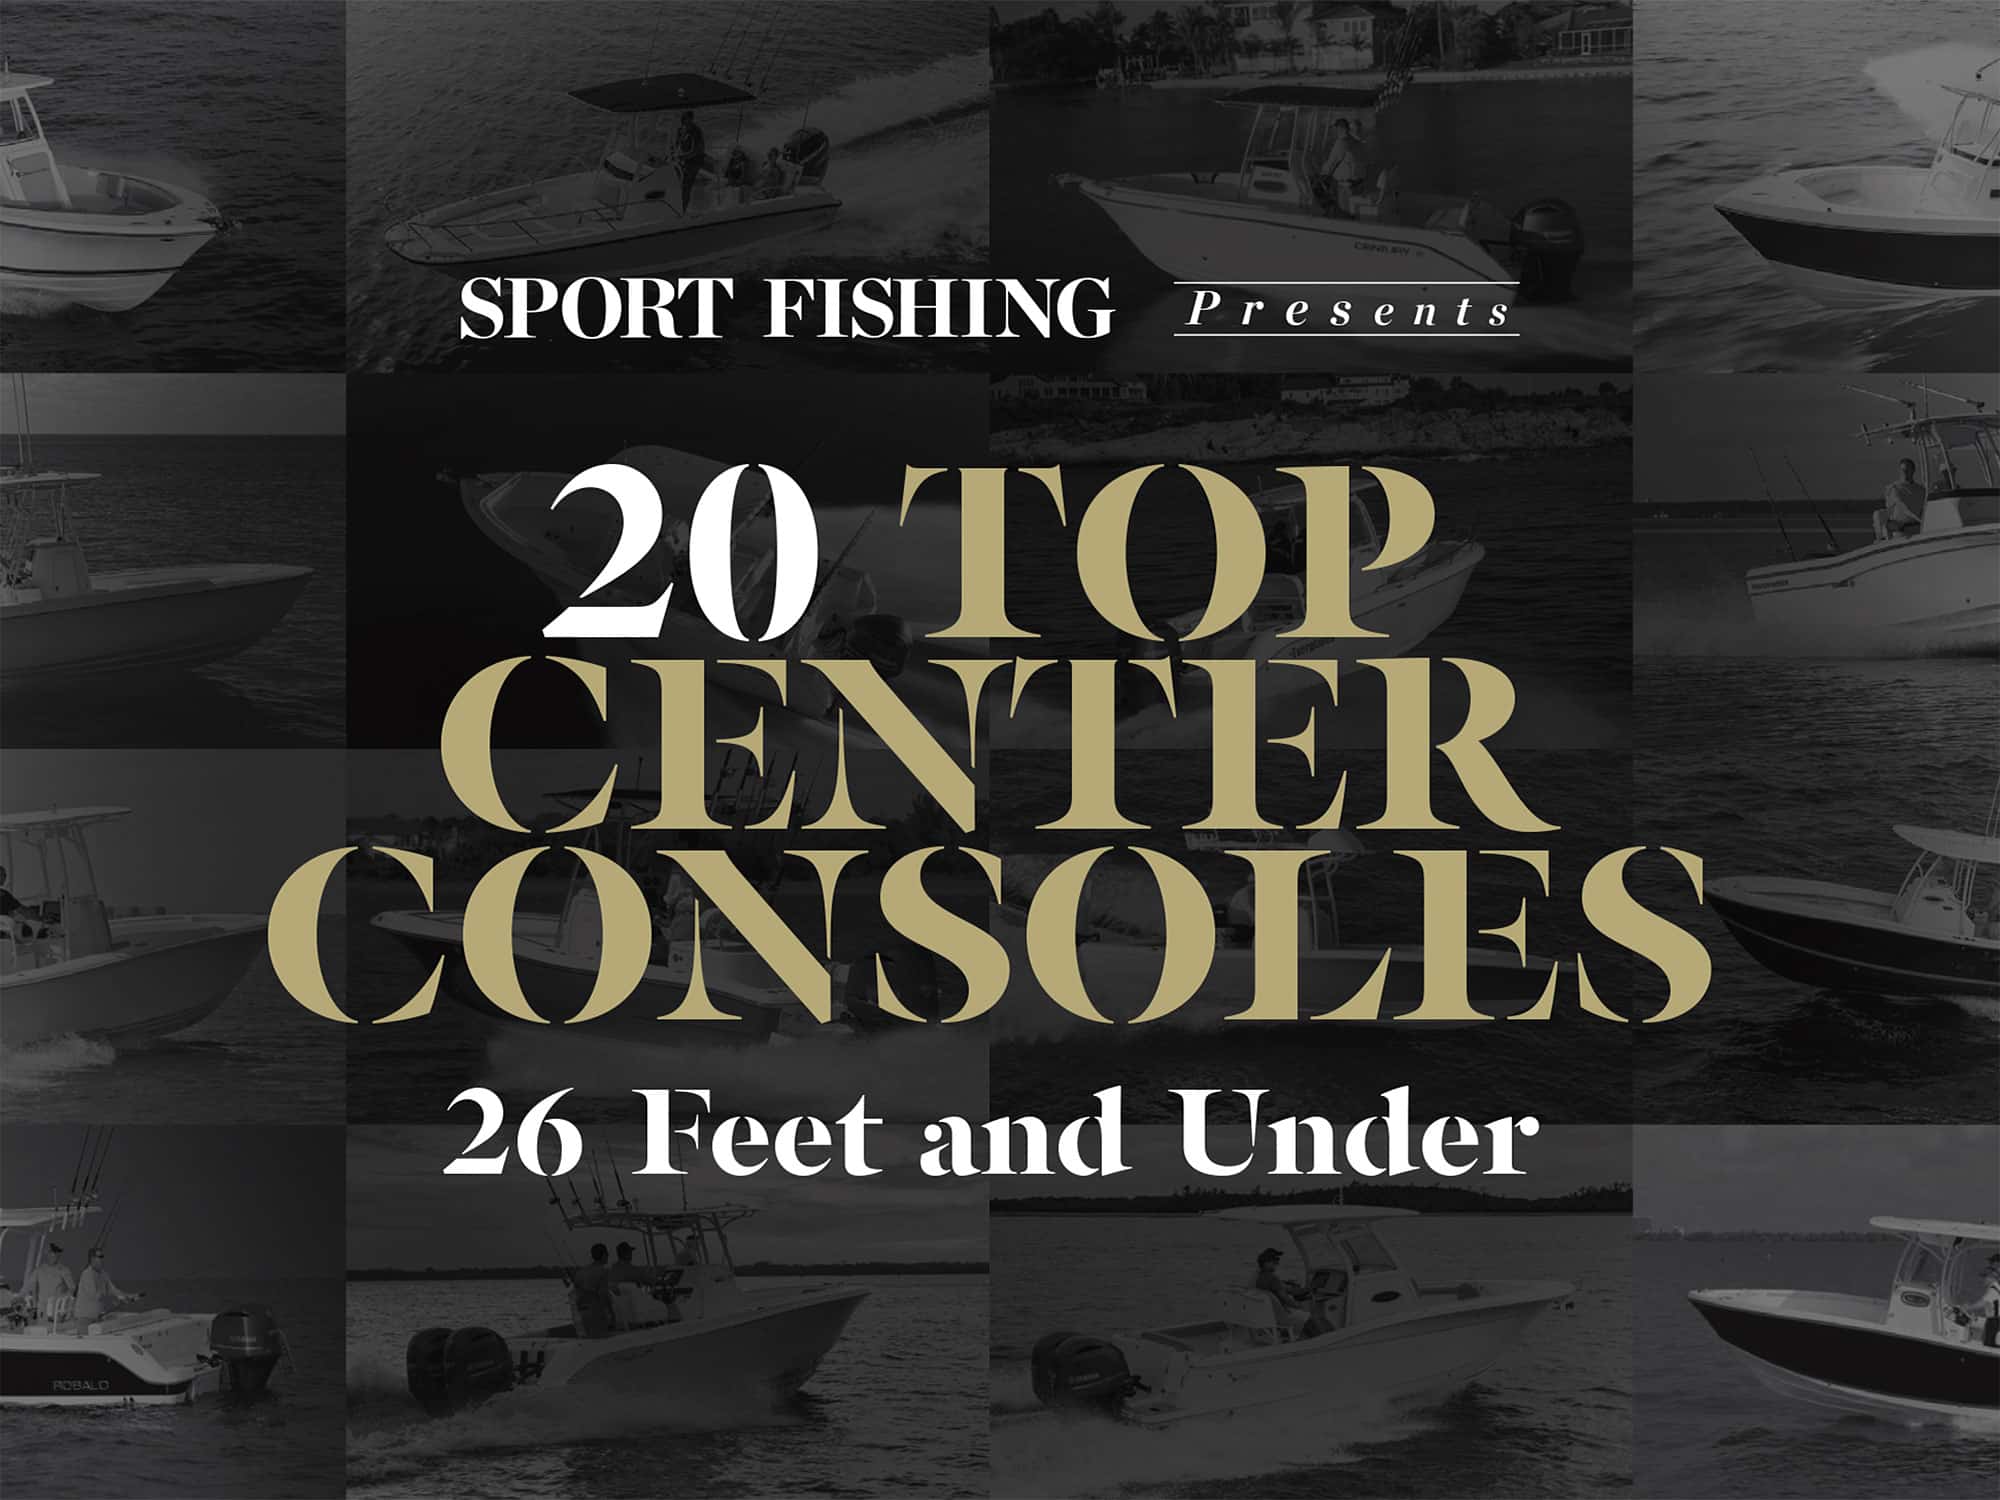 10 Best Gifts for the Bottom Fisherman - On The Water